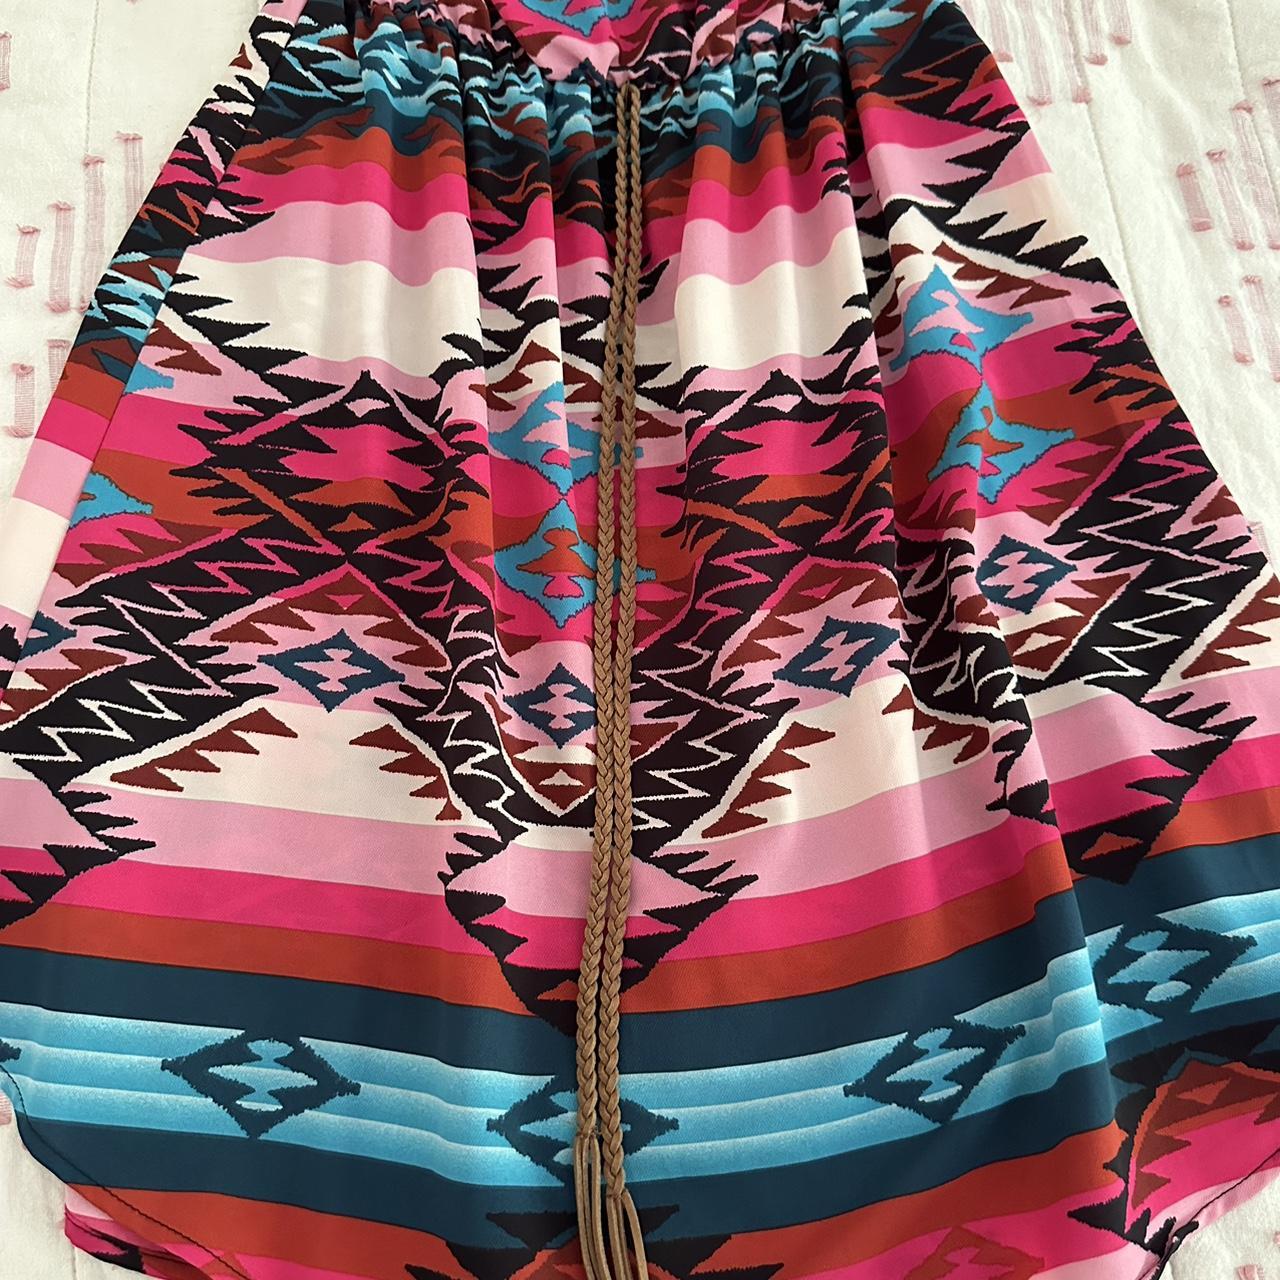 Women's Pink and Blue Dress (2)